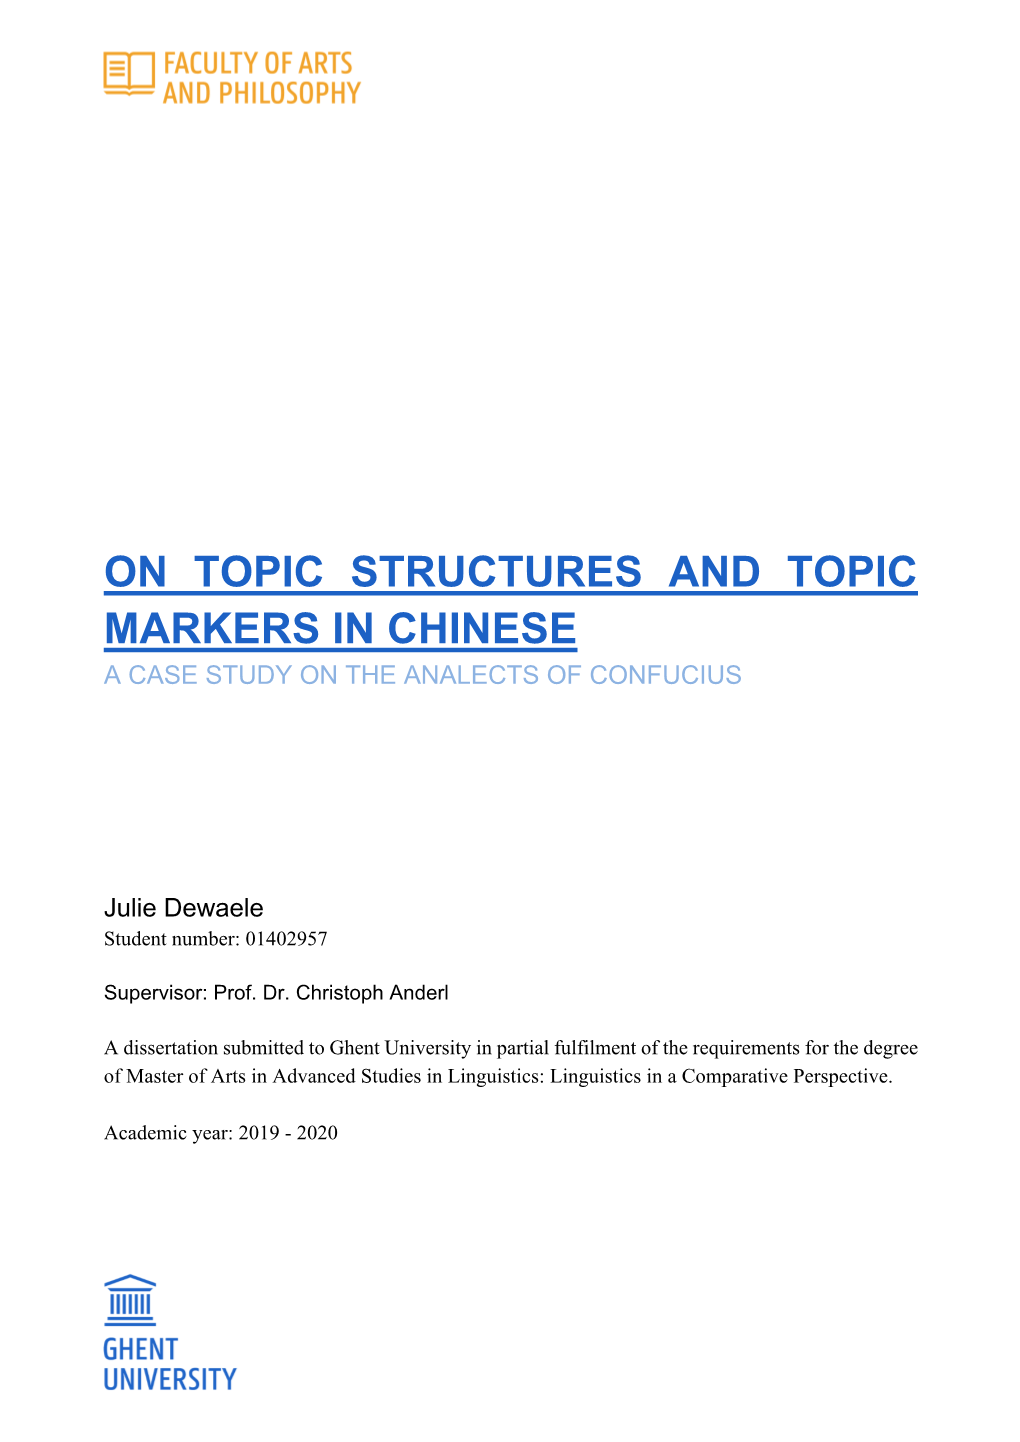 On Topic Structures and Topic Markers in Chinese a Case Study on the Analects of Confucius